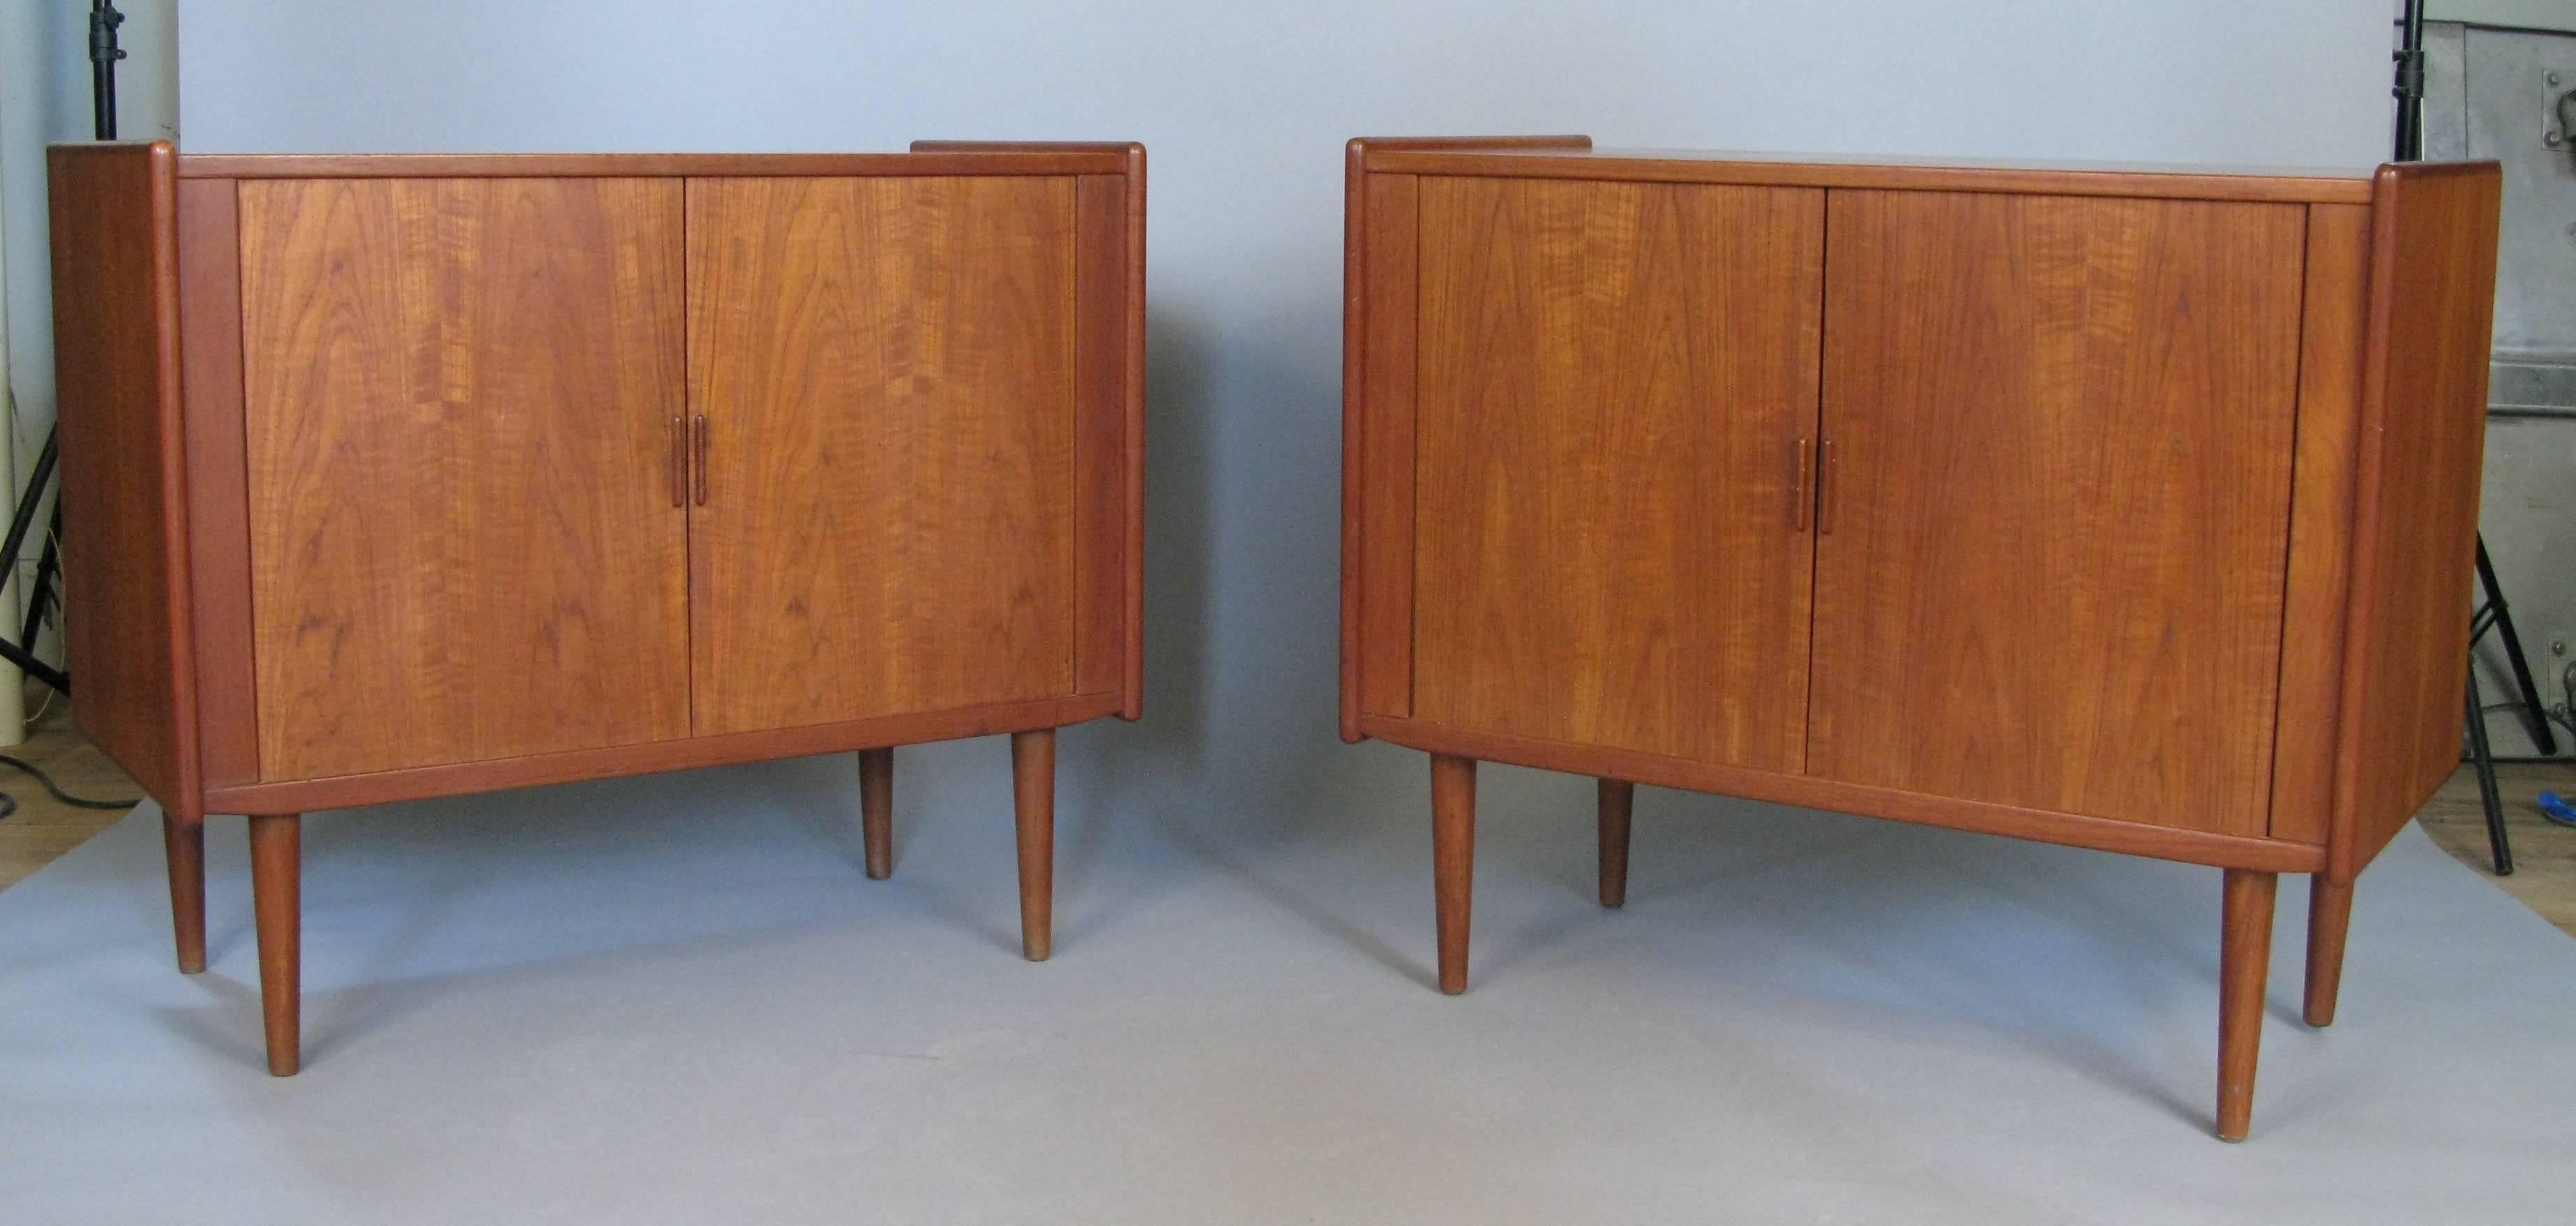 A beautiful matched pair of 1950s Danish teak cabinets with tambour doors and adjustable shelves. Nice scale and design with subtle details. Raised on tapered teak legs.